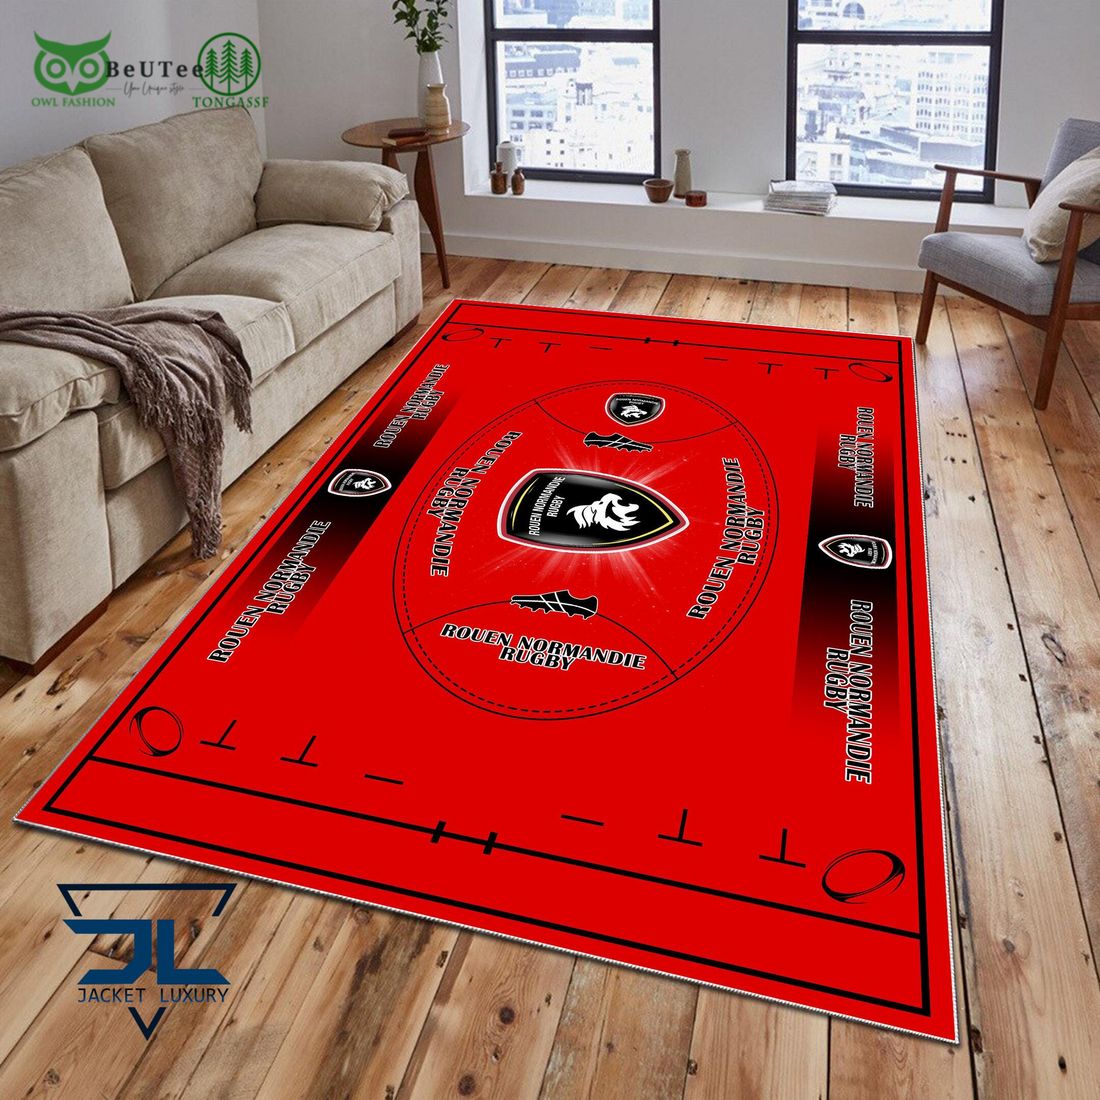 rouen normandie rugby french rugby carpet rug 1 m1Mkm